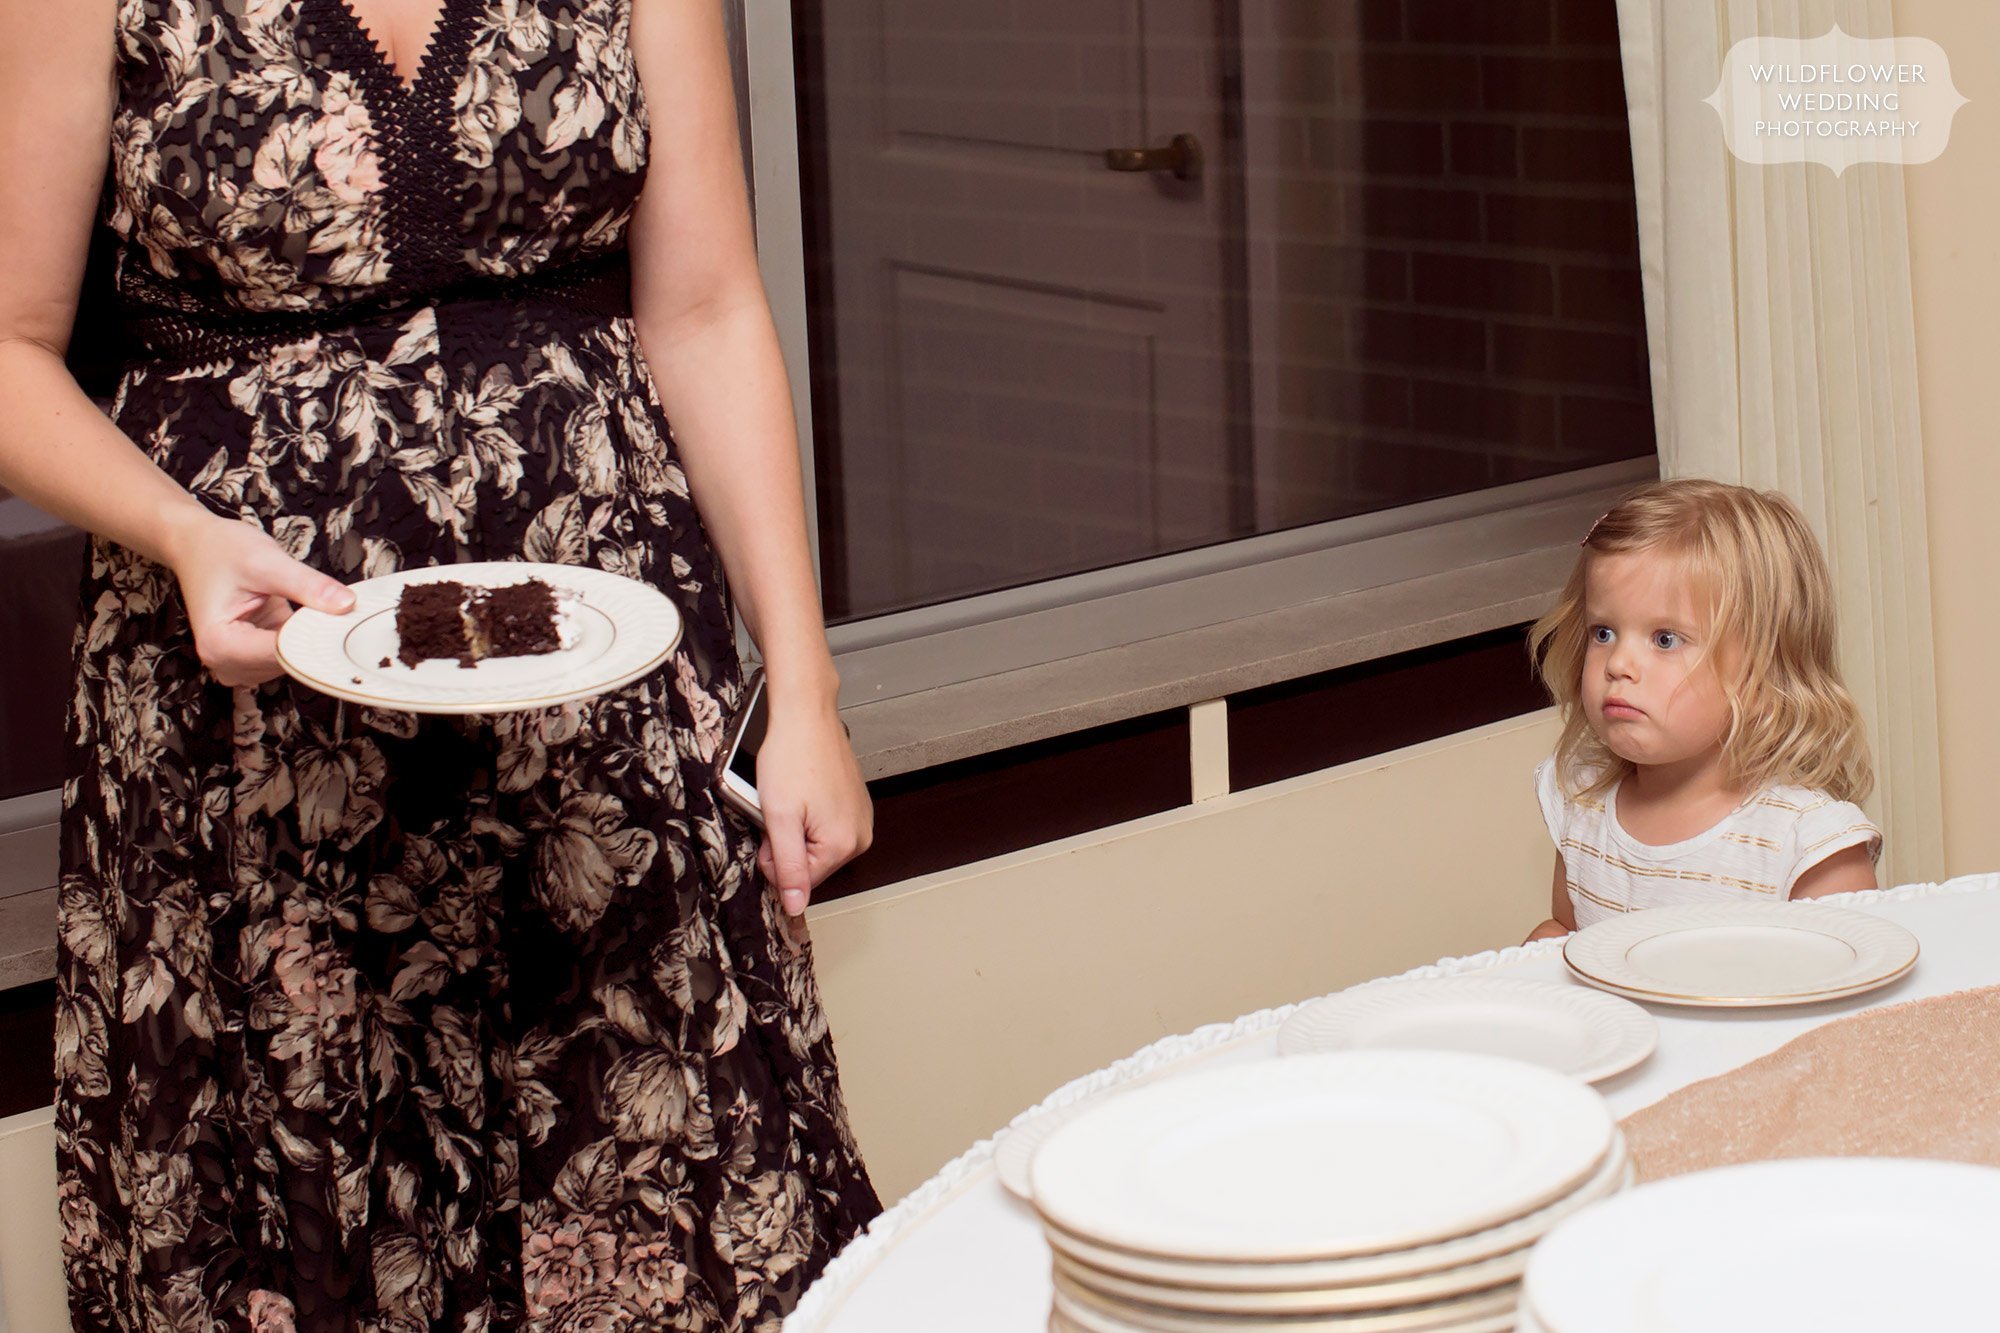 Funny documentary wedding photo of the flower girl looking at cake.